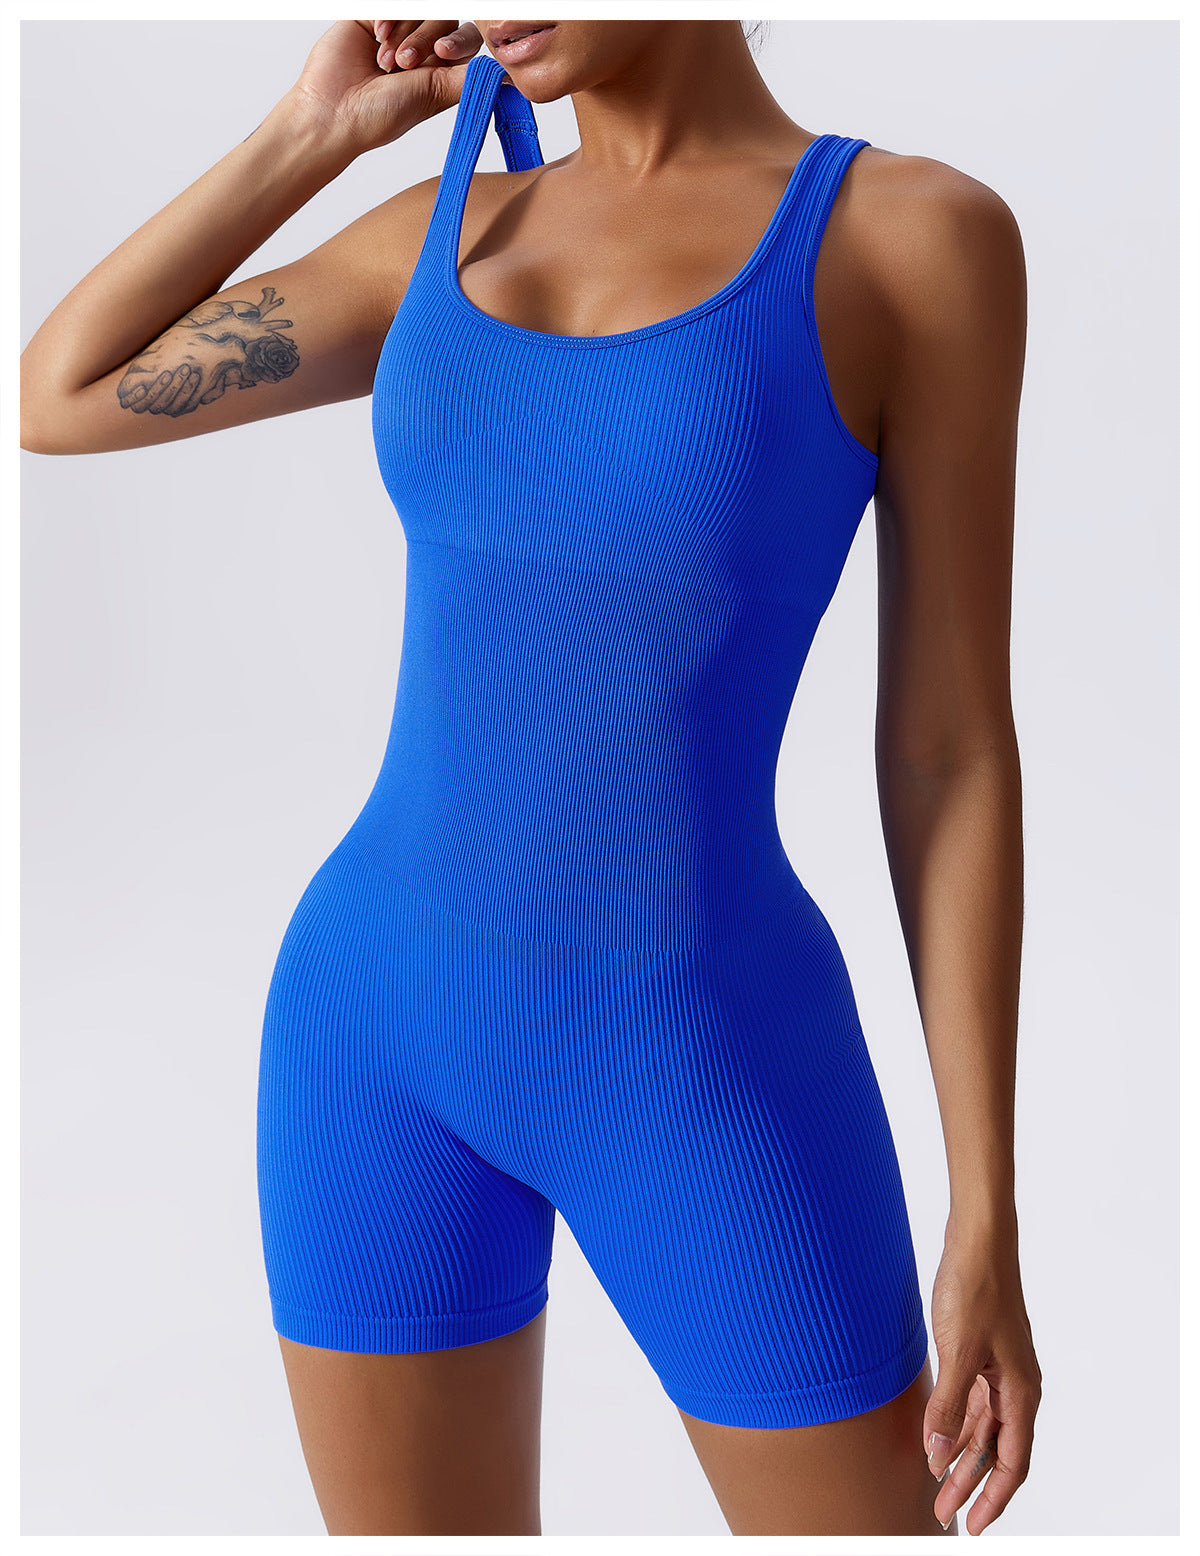 High Elastic One Piece Tight One Piece Aerial Beauty Back Yoga Clothes